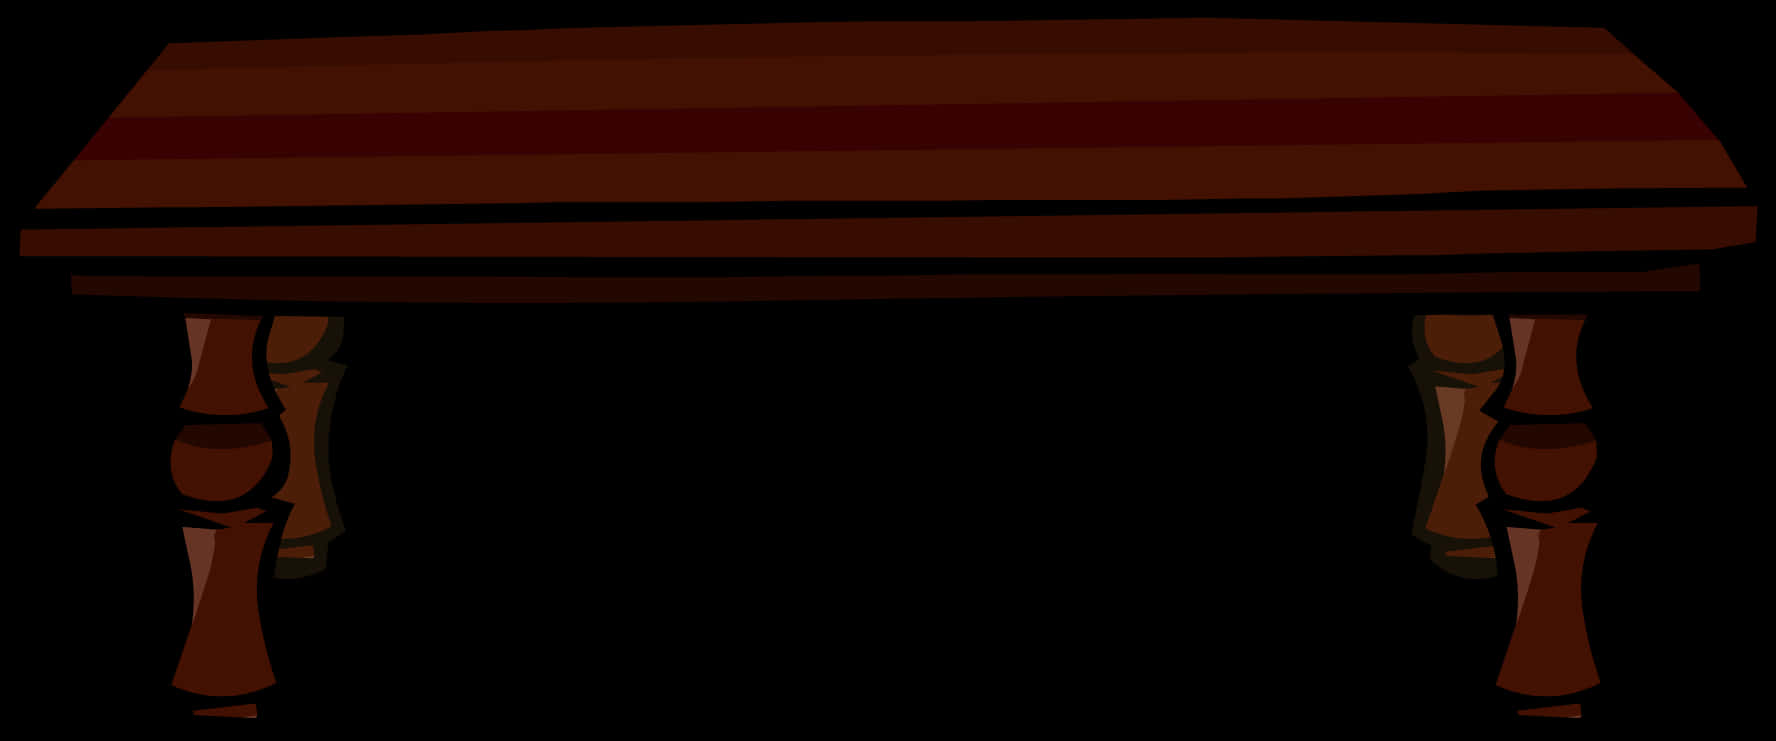 A Black Background With Red And Black Stripes